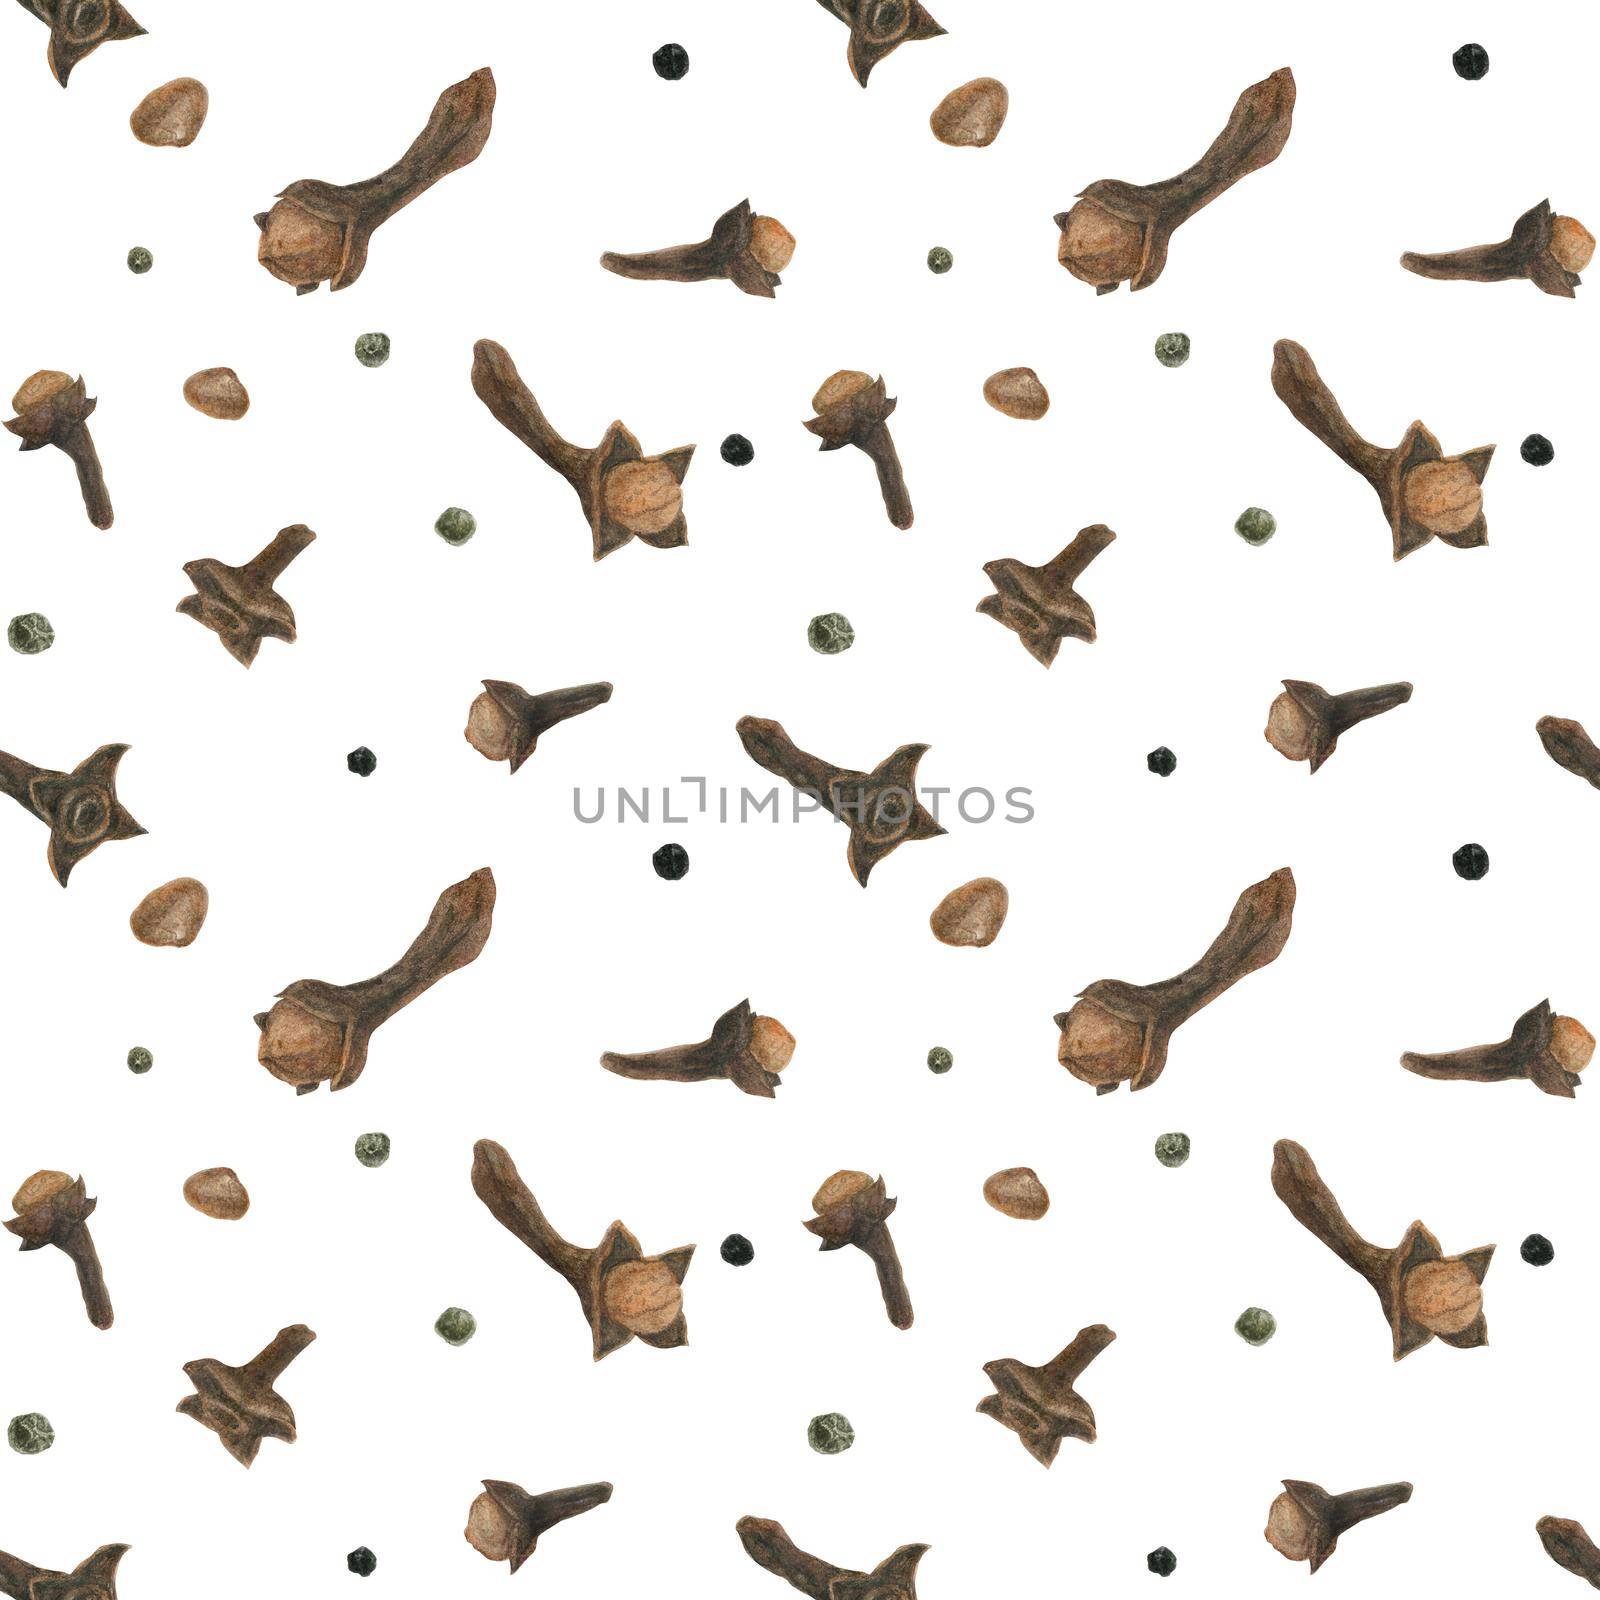 Dried cloves white seamless pattern by Xeniasnowstorm